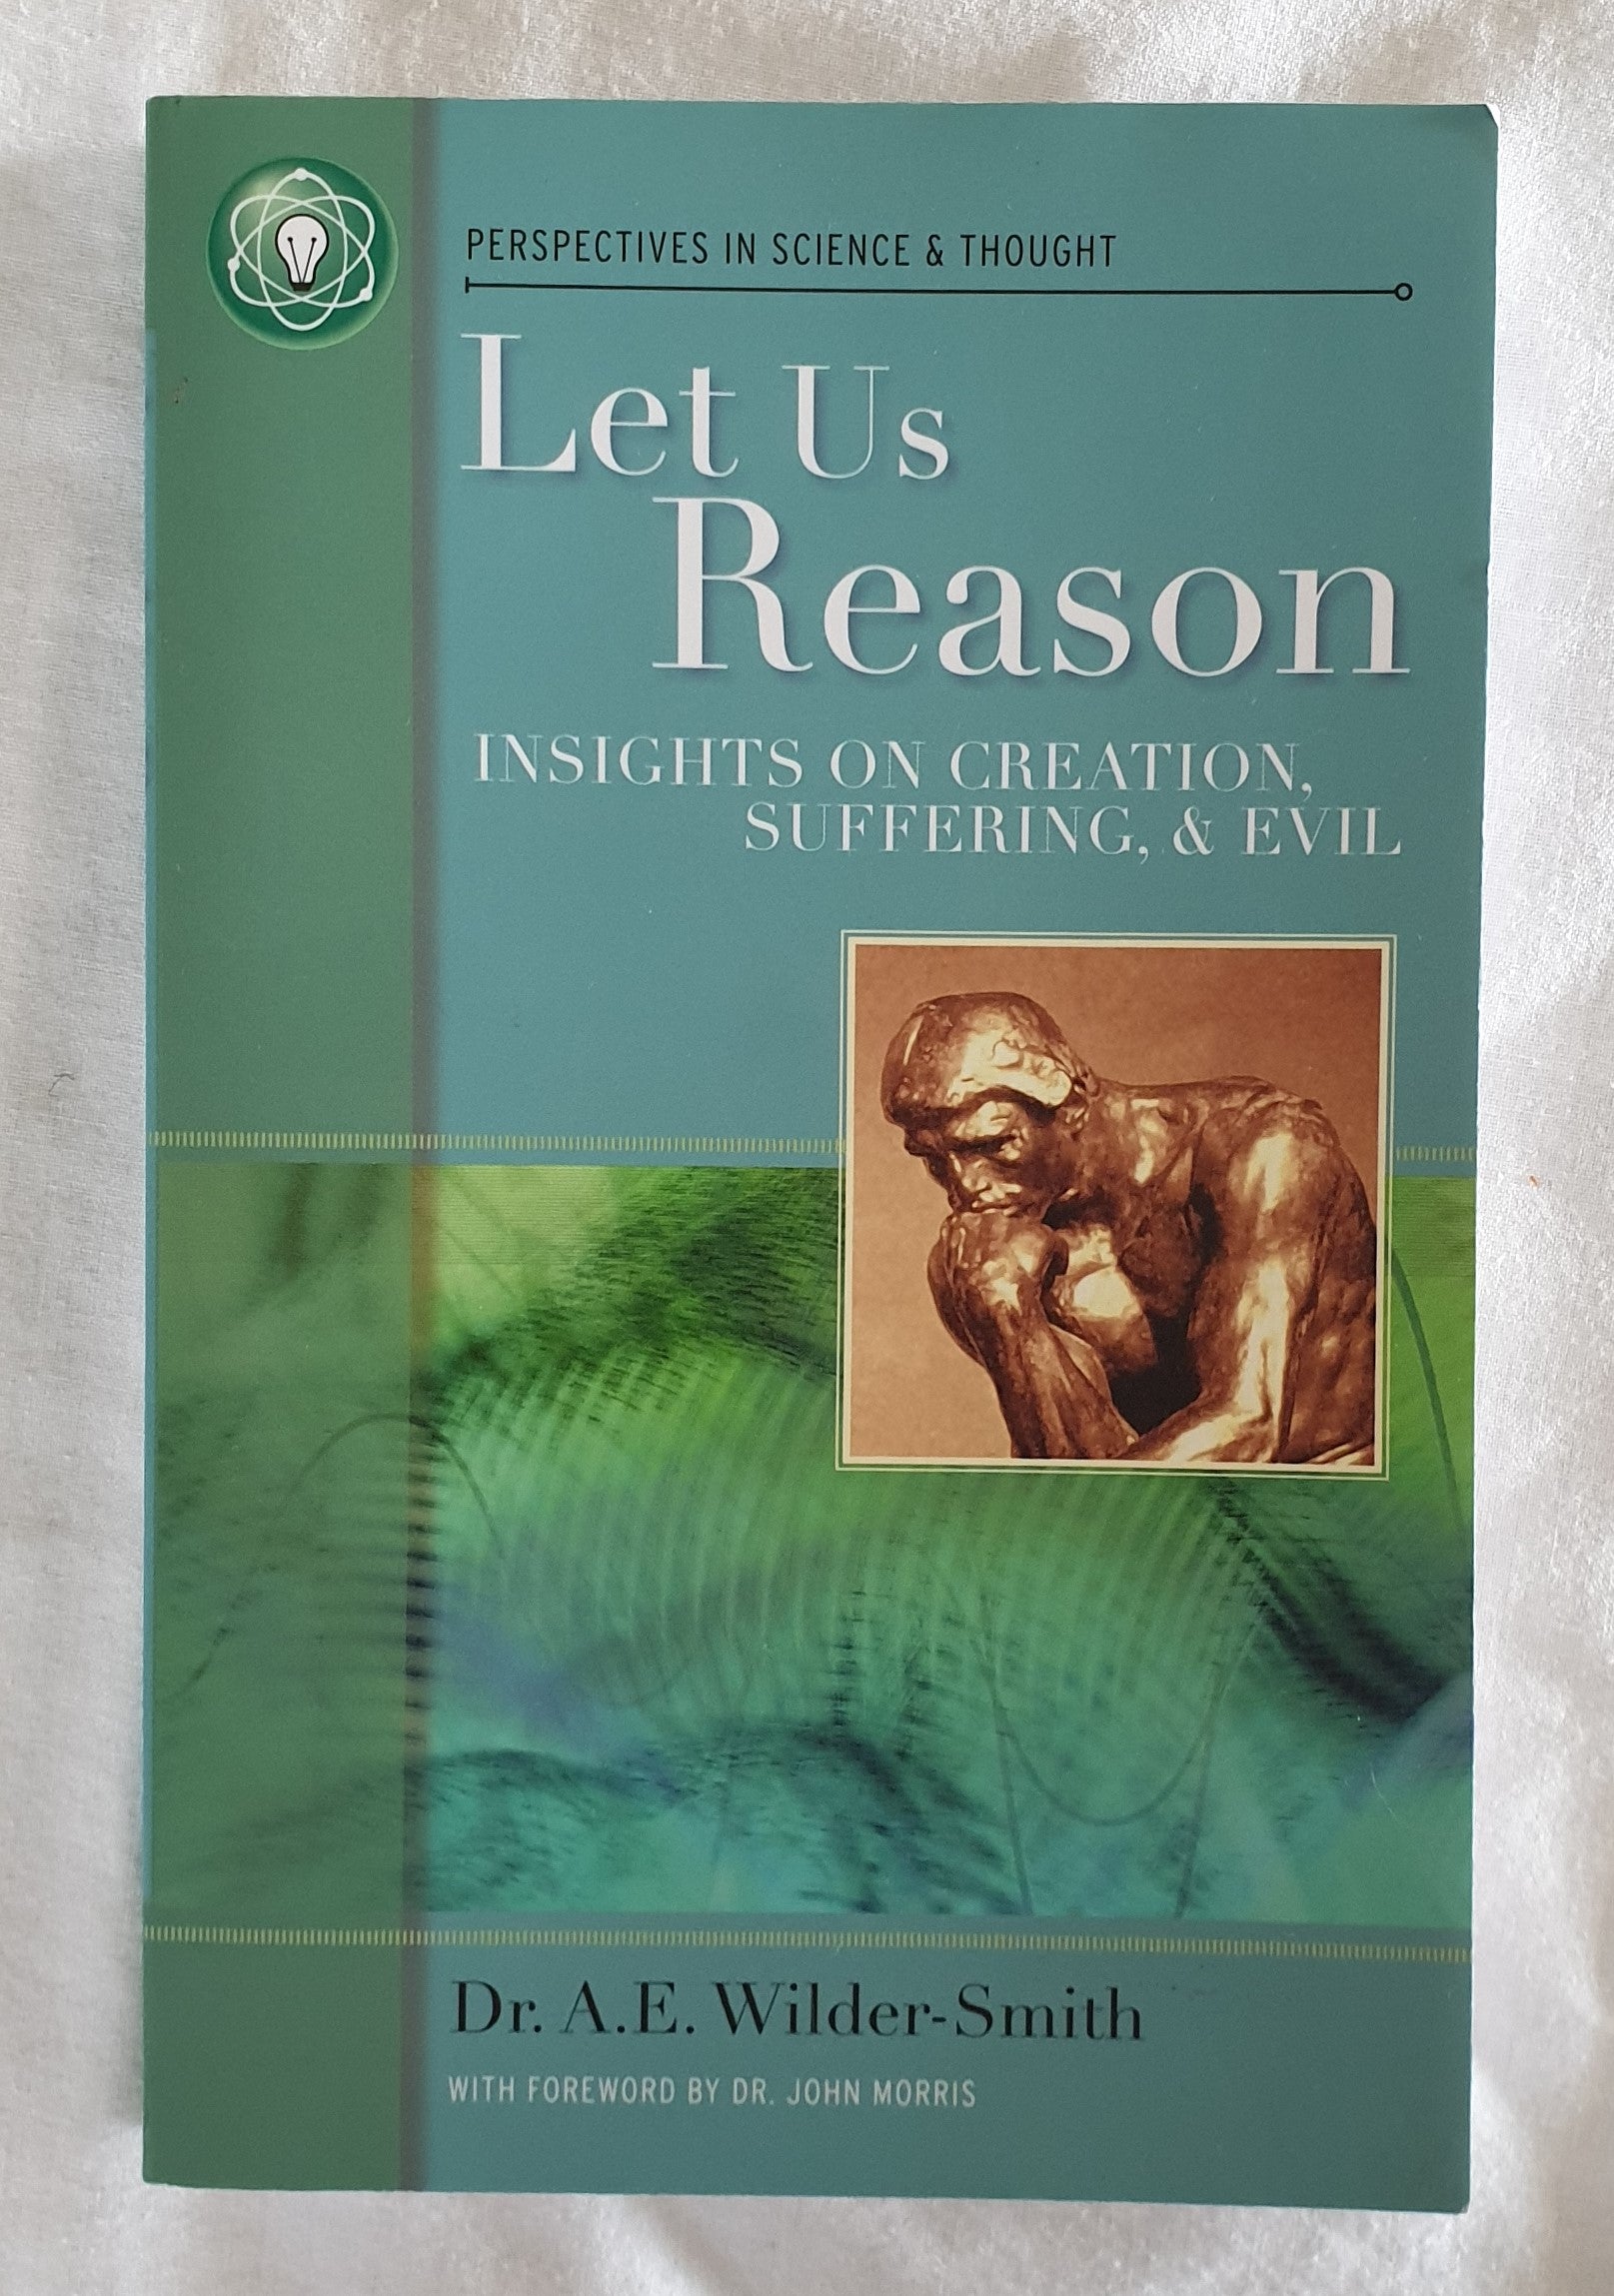 Let Us Reason by Dr A. E. Wilder-Smith